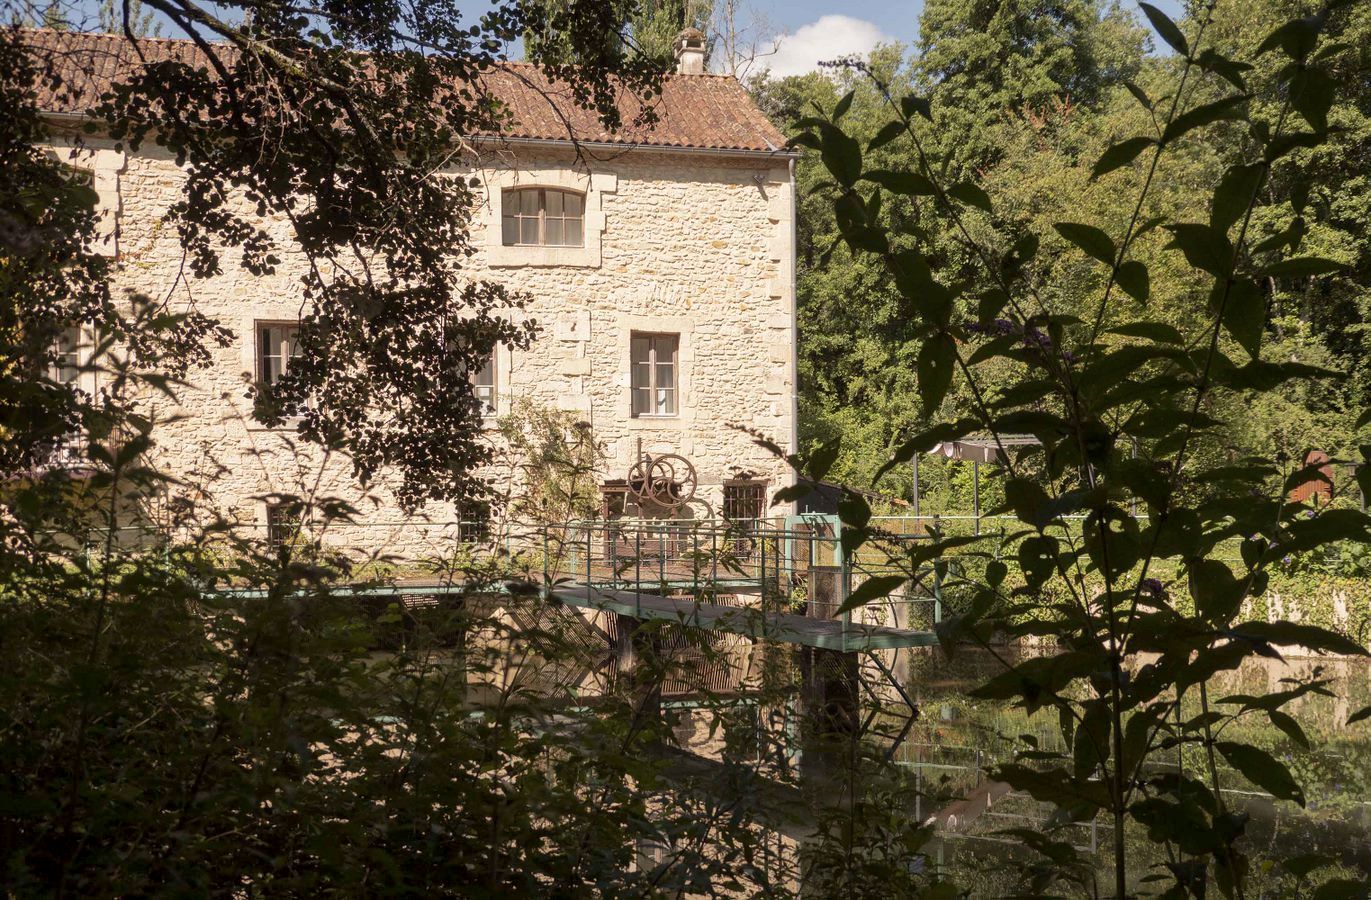 The Moulin de la Barde in Le Bugue on the banks of the Ladouch